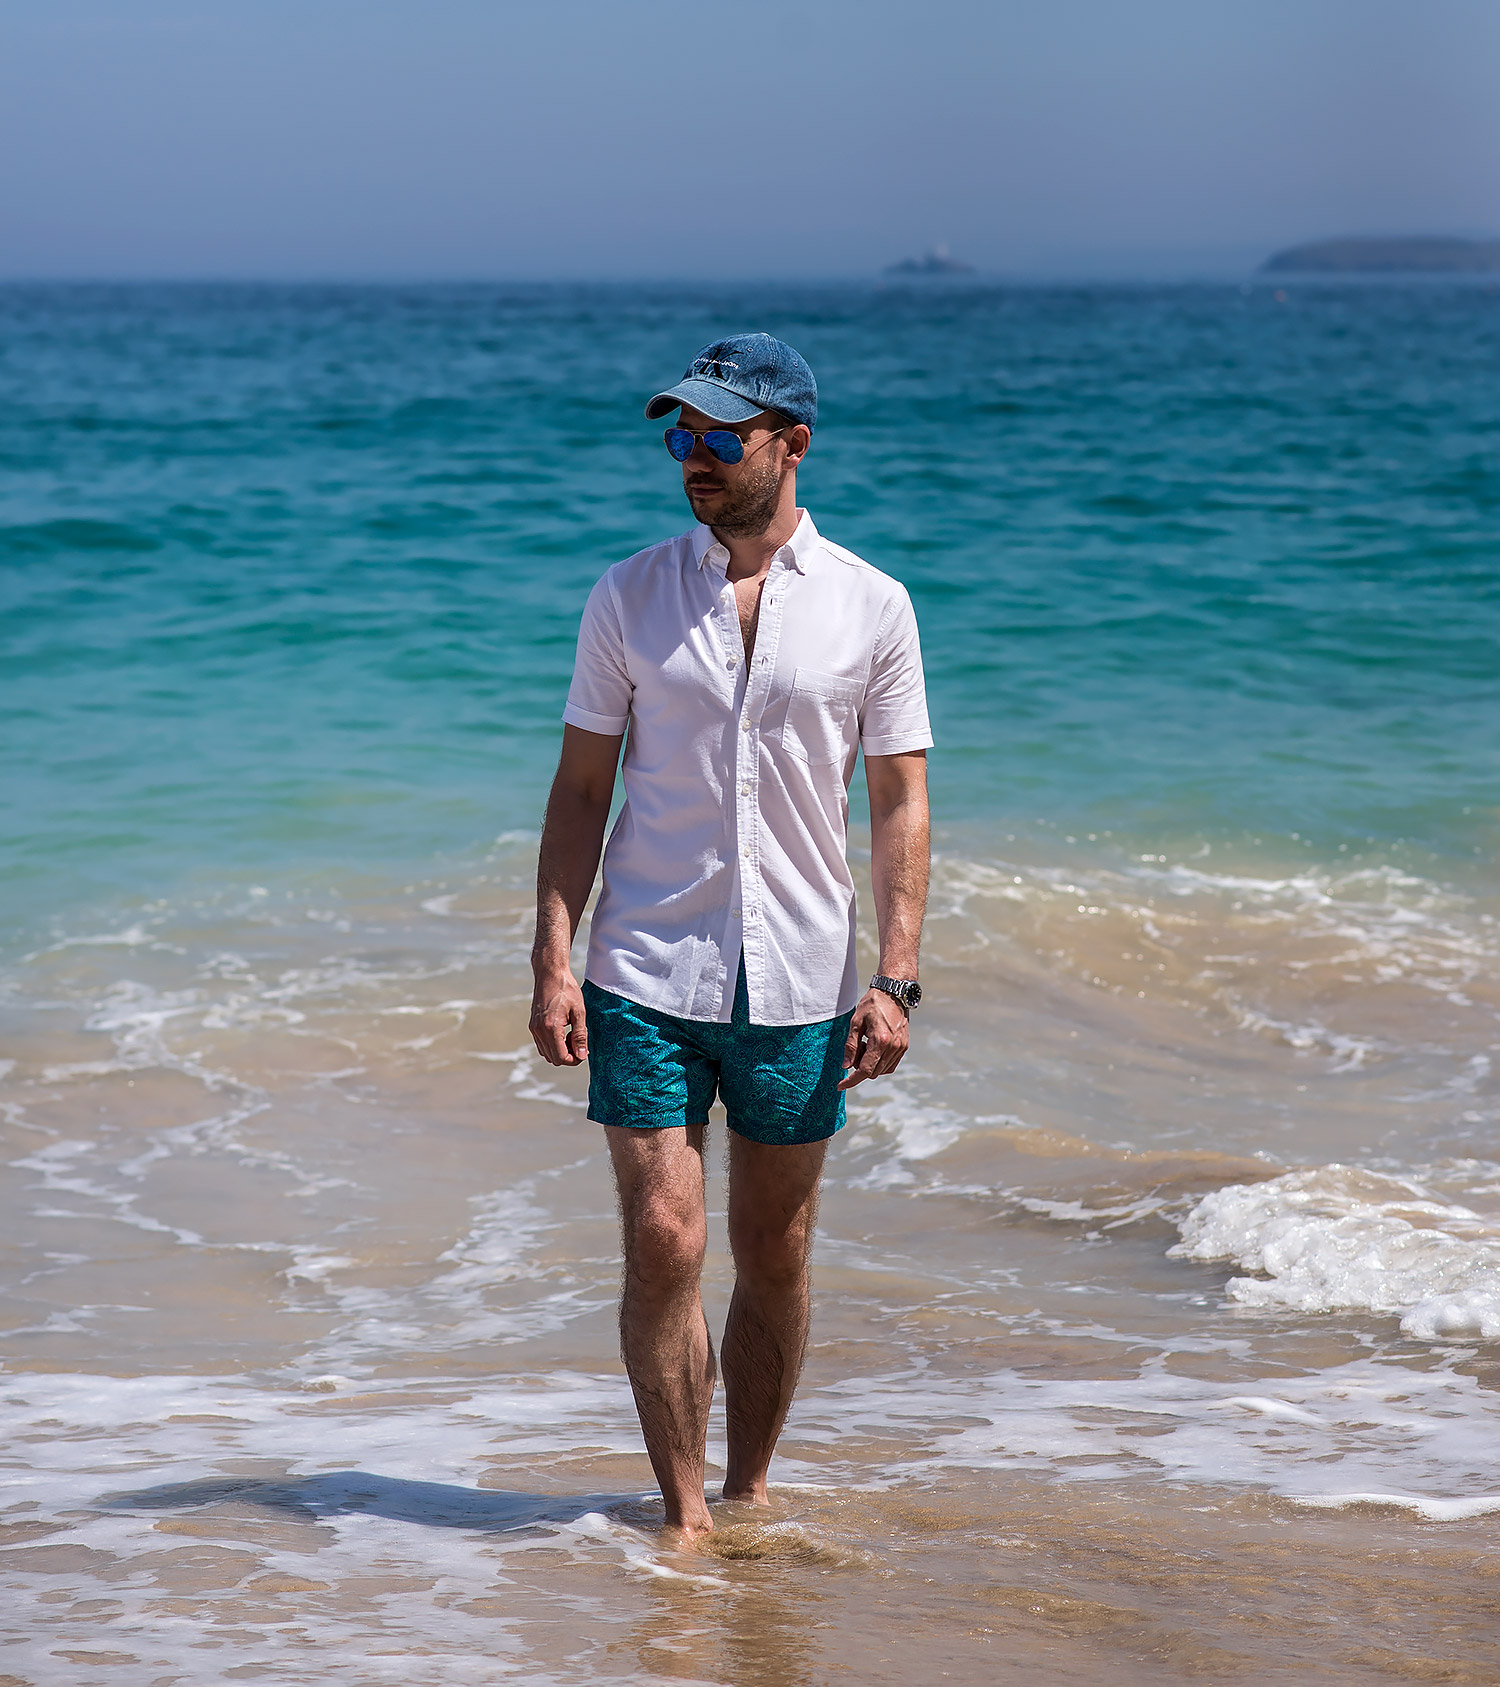 Sea Splashing St Ives Beach Outfit - Your Average Guy